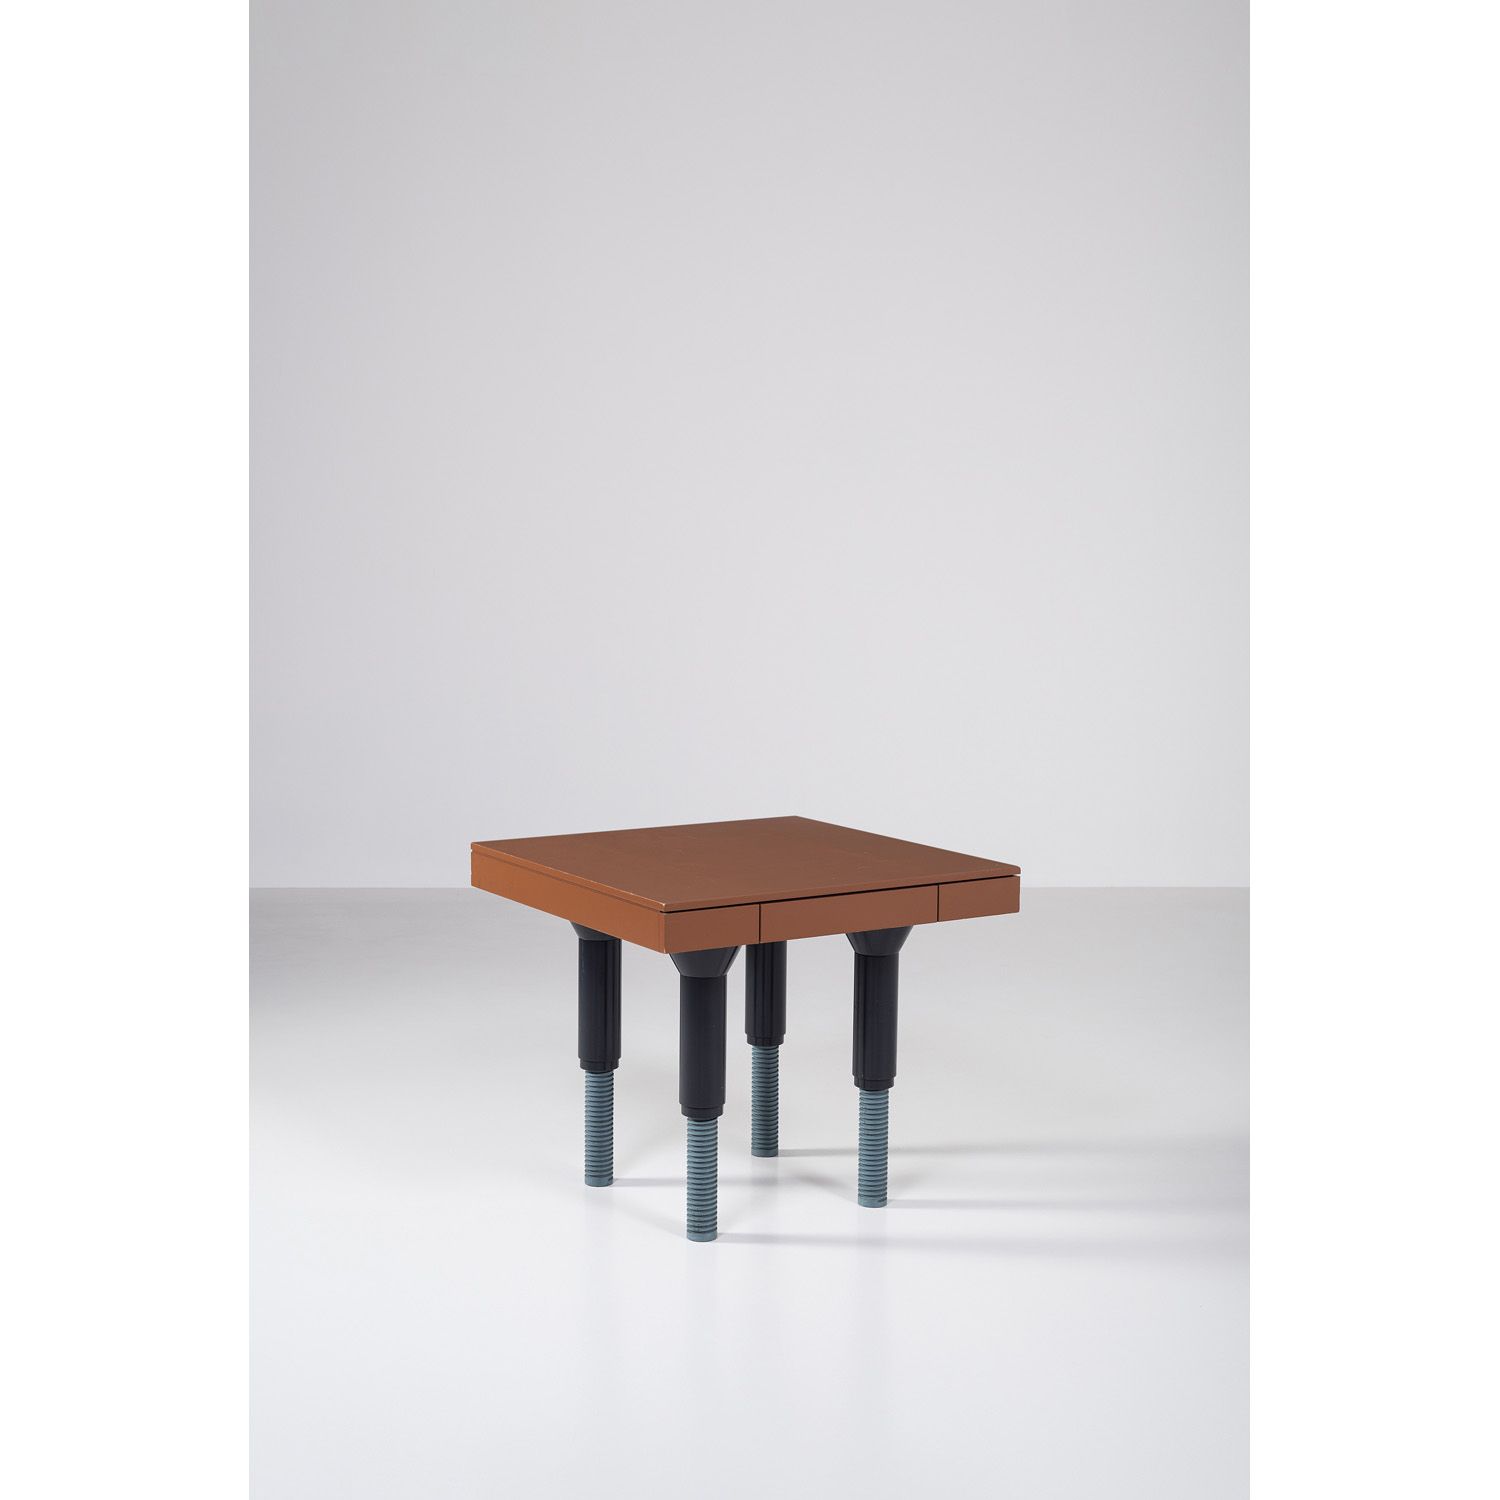 Null Shigeru Uchida (1943-2016)

'August' table with drawer

Lacquered wood

Mod&hellip;